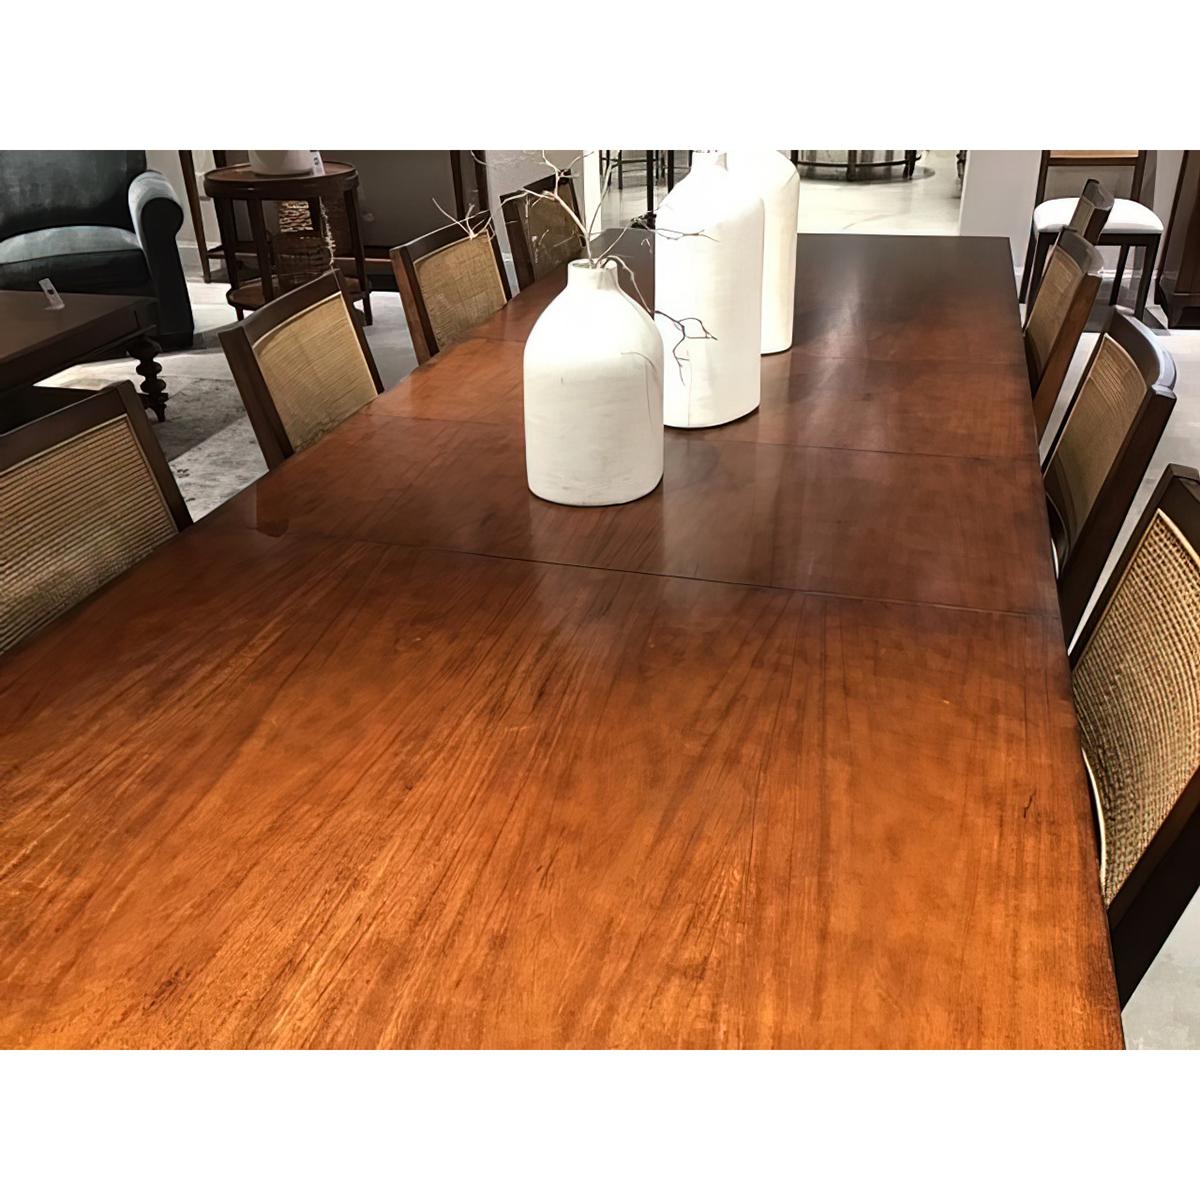 Wood Parsons Dining Table - Mahogany Finish For Sale